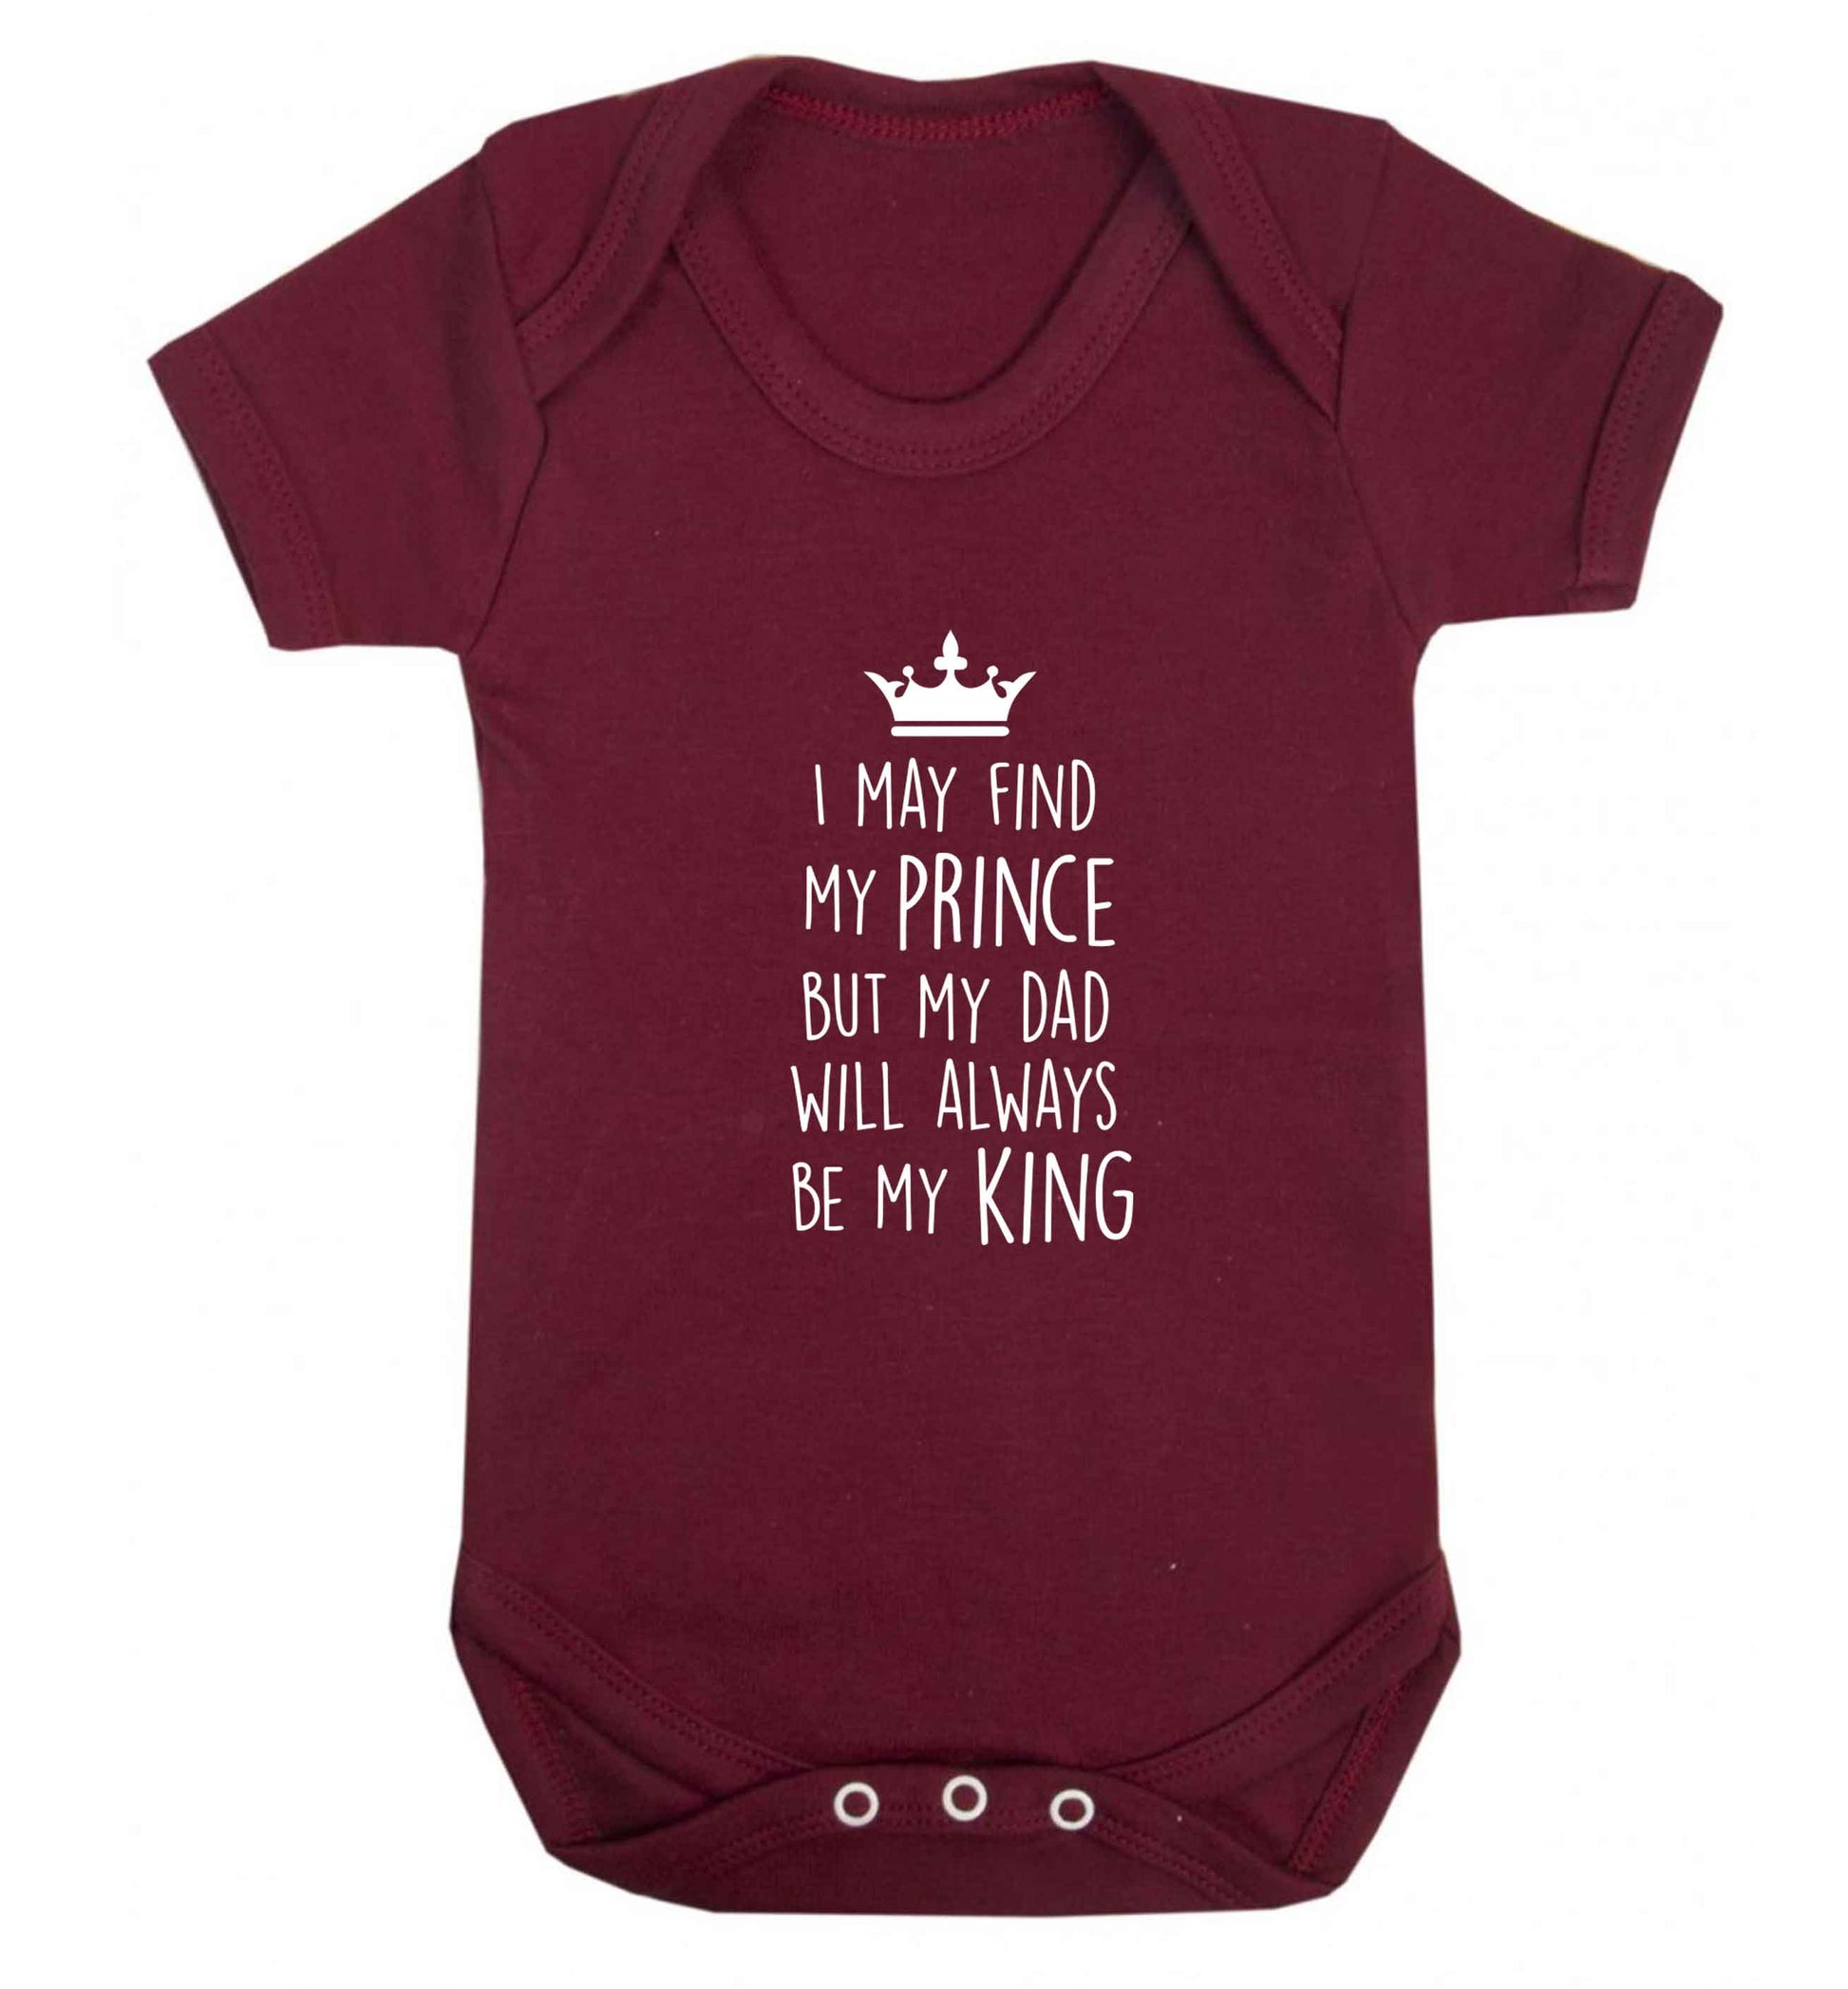 I may find my prince but my dad will always be my king baby vest maroon 18-24 months